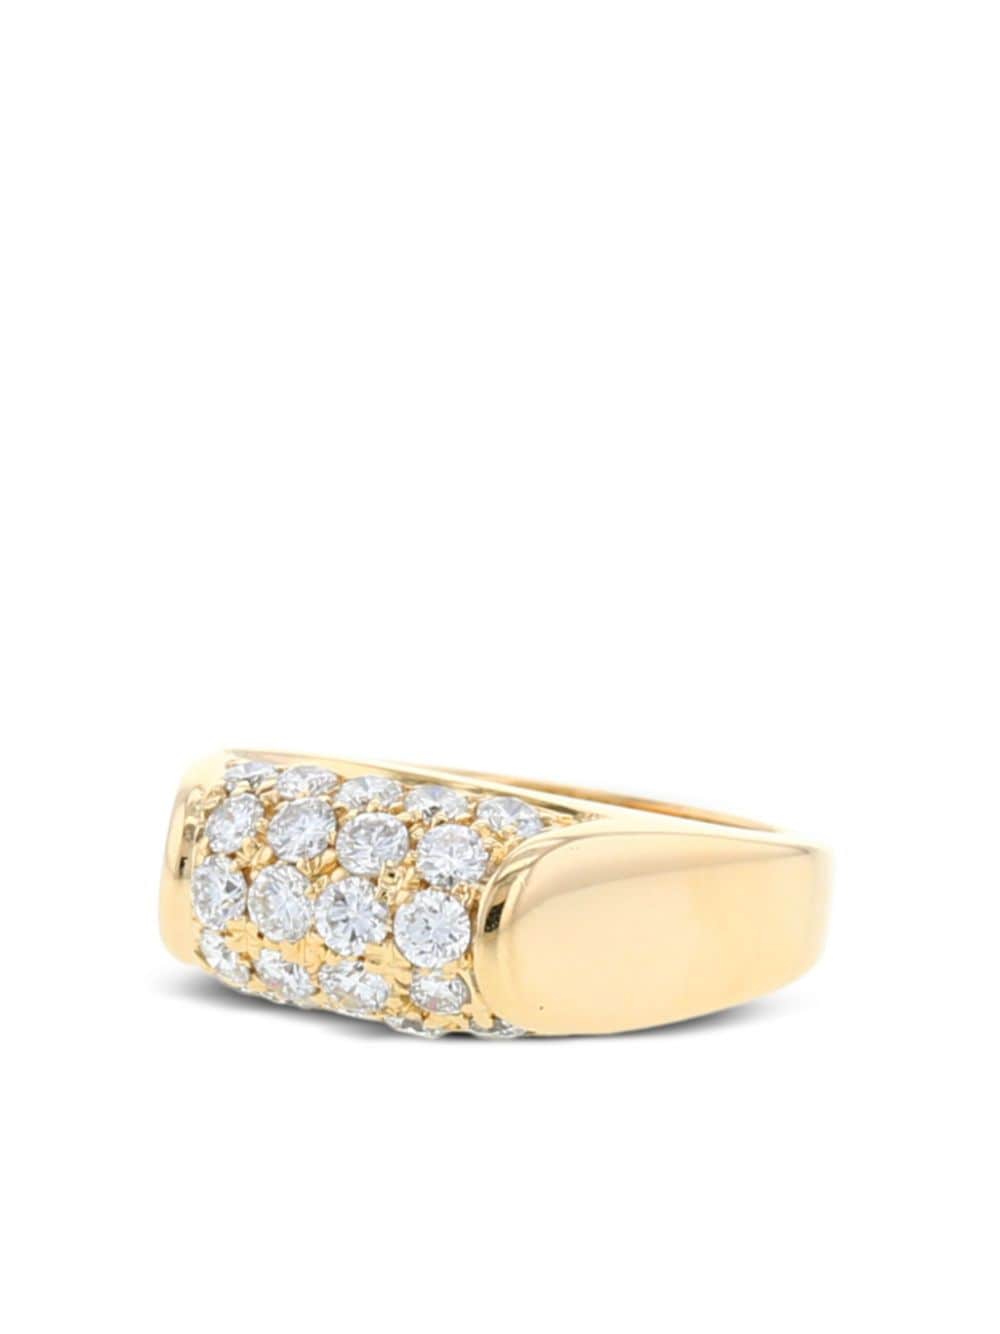 Pre-owned Bvlgari 2010 Tronchetto Yellow Gold And Diamond Ring